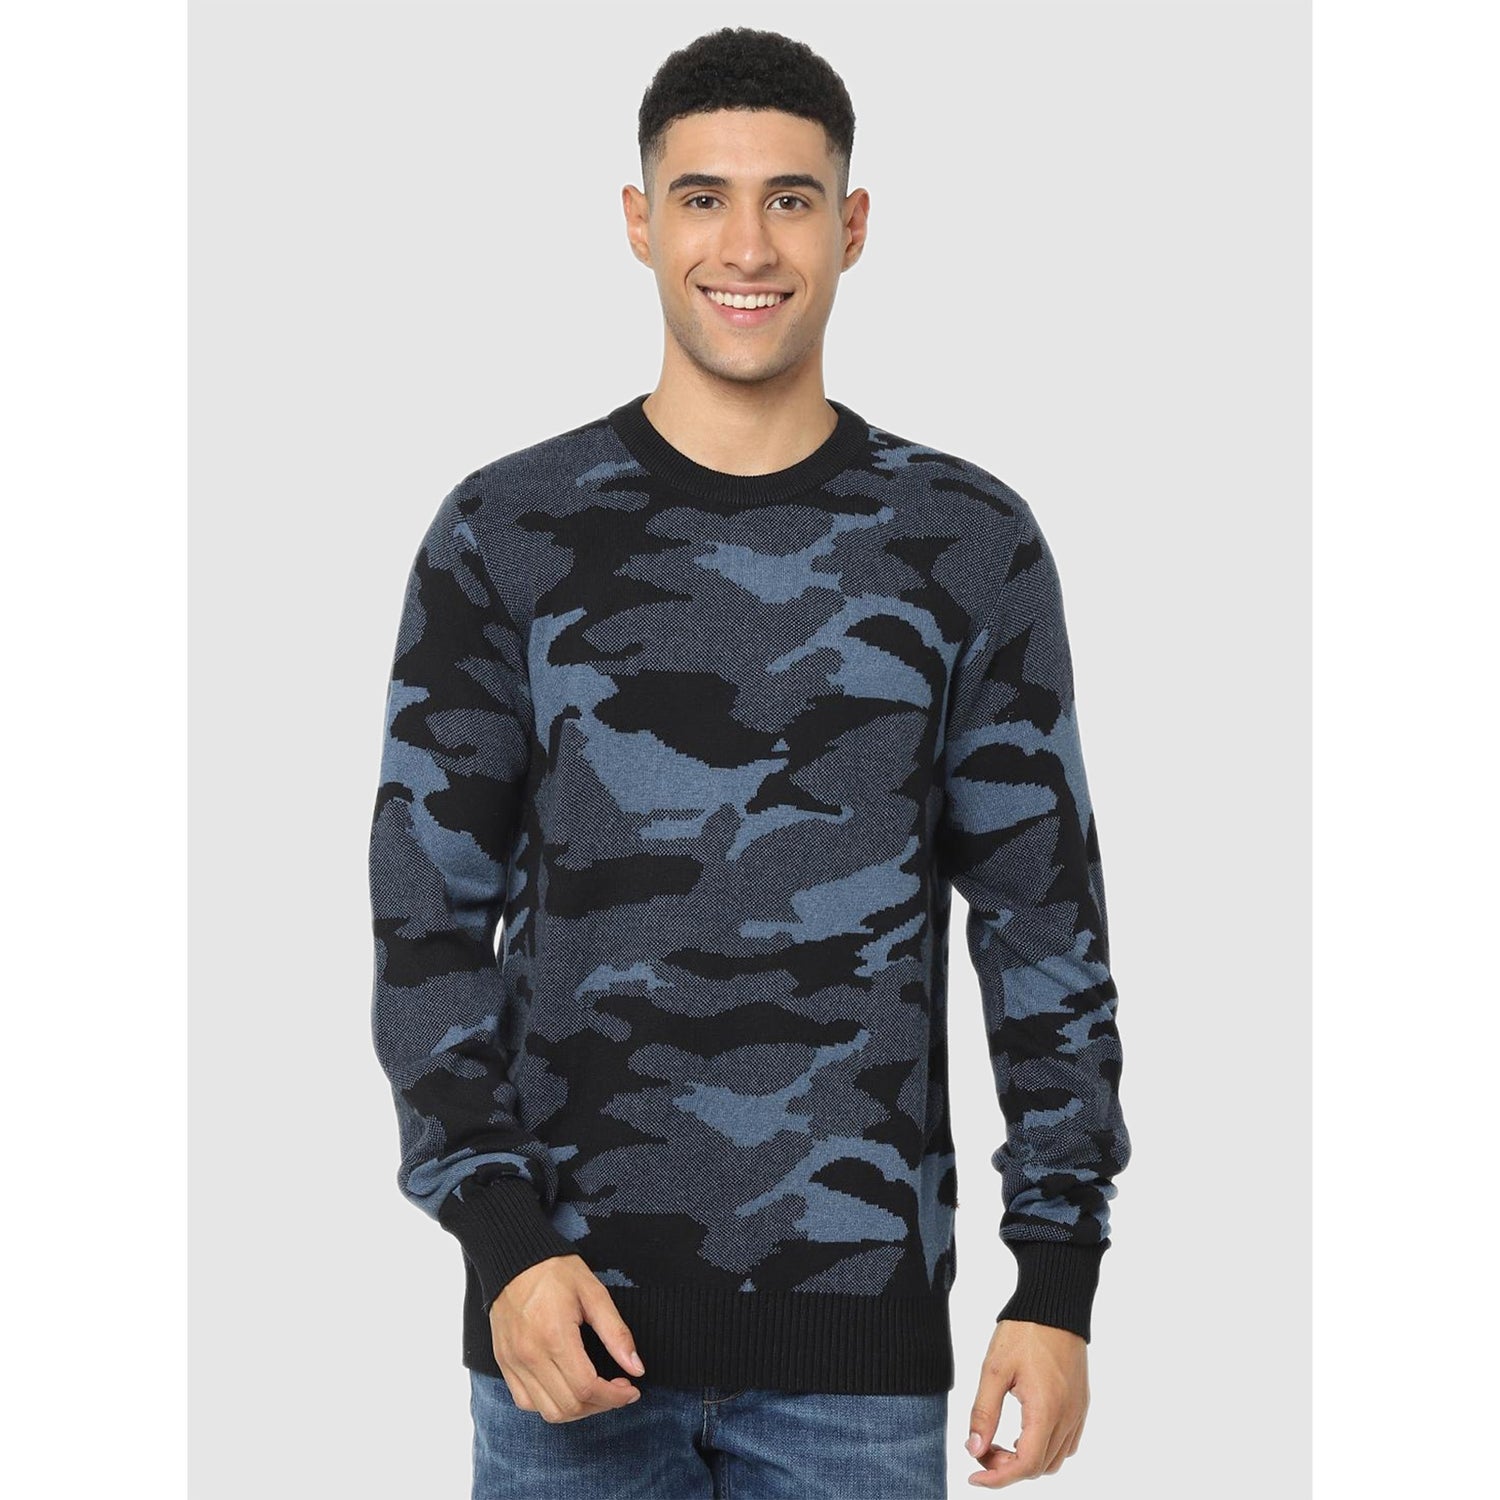 Black and Grey Printed Pullover Sweater (CECAMO)